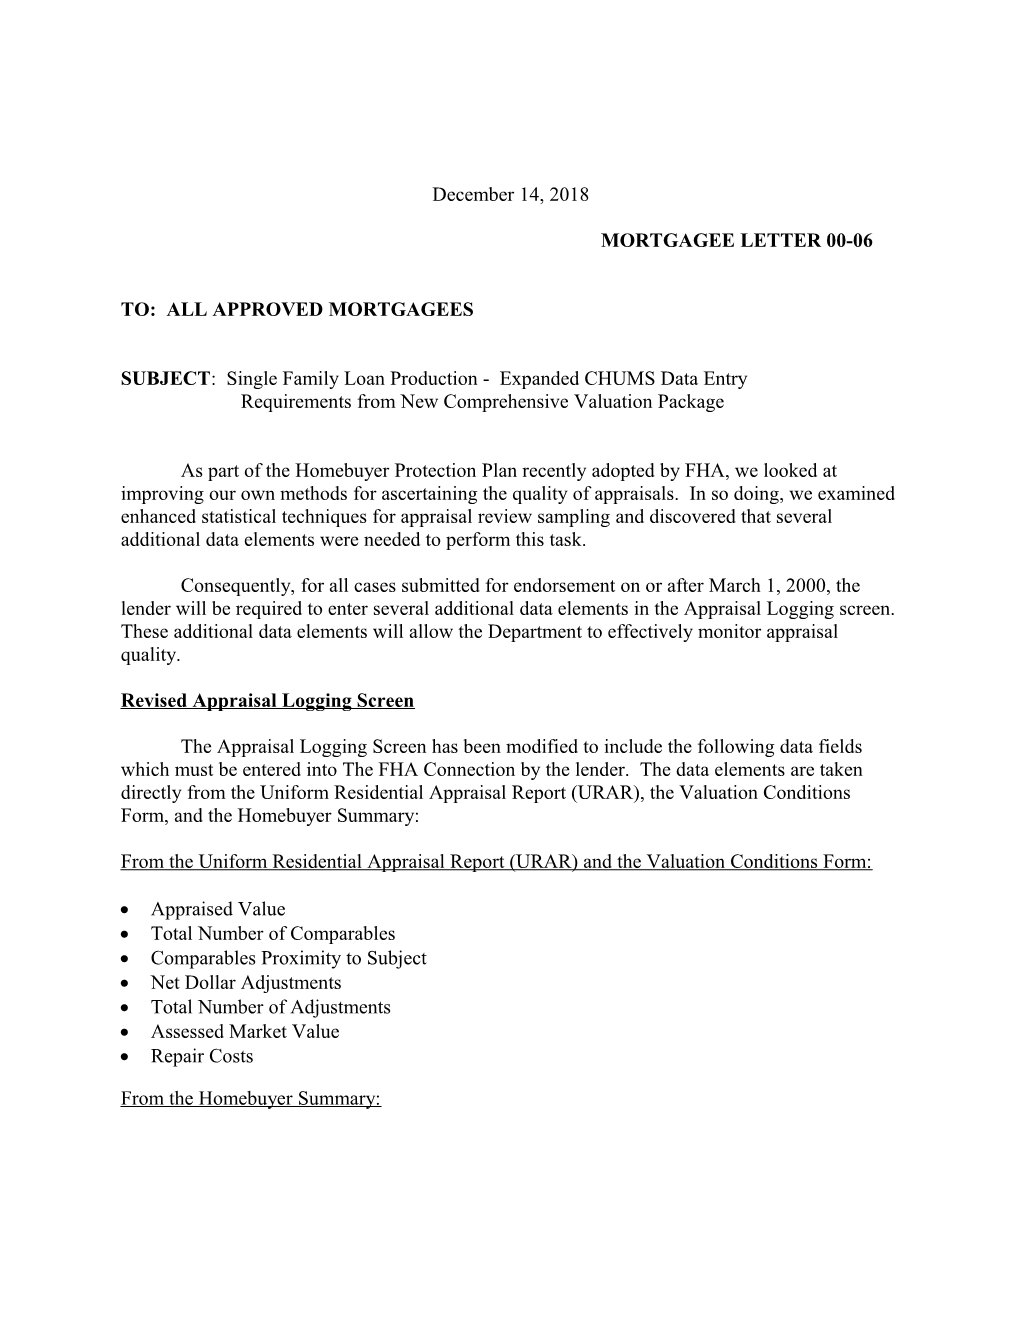 Mortgagee Letter 00-06